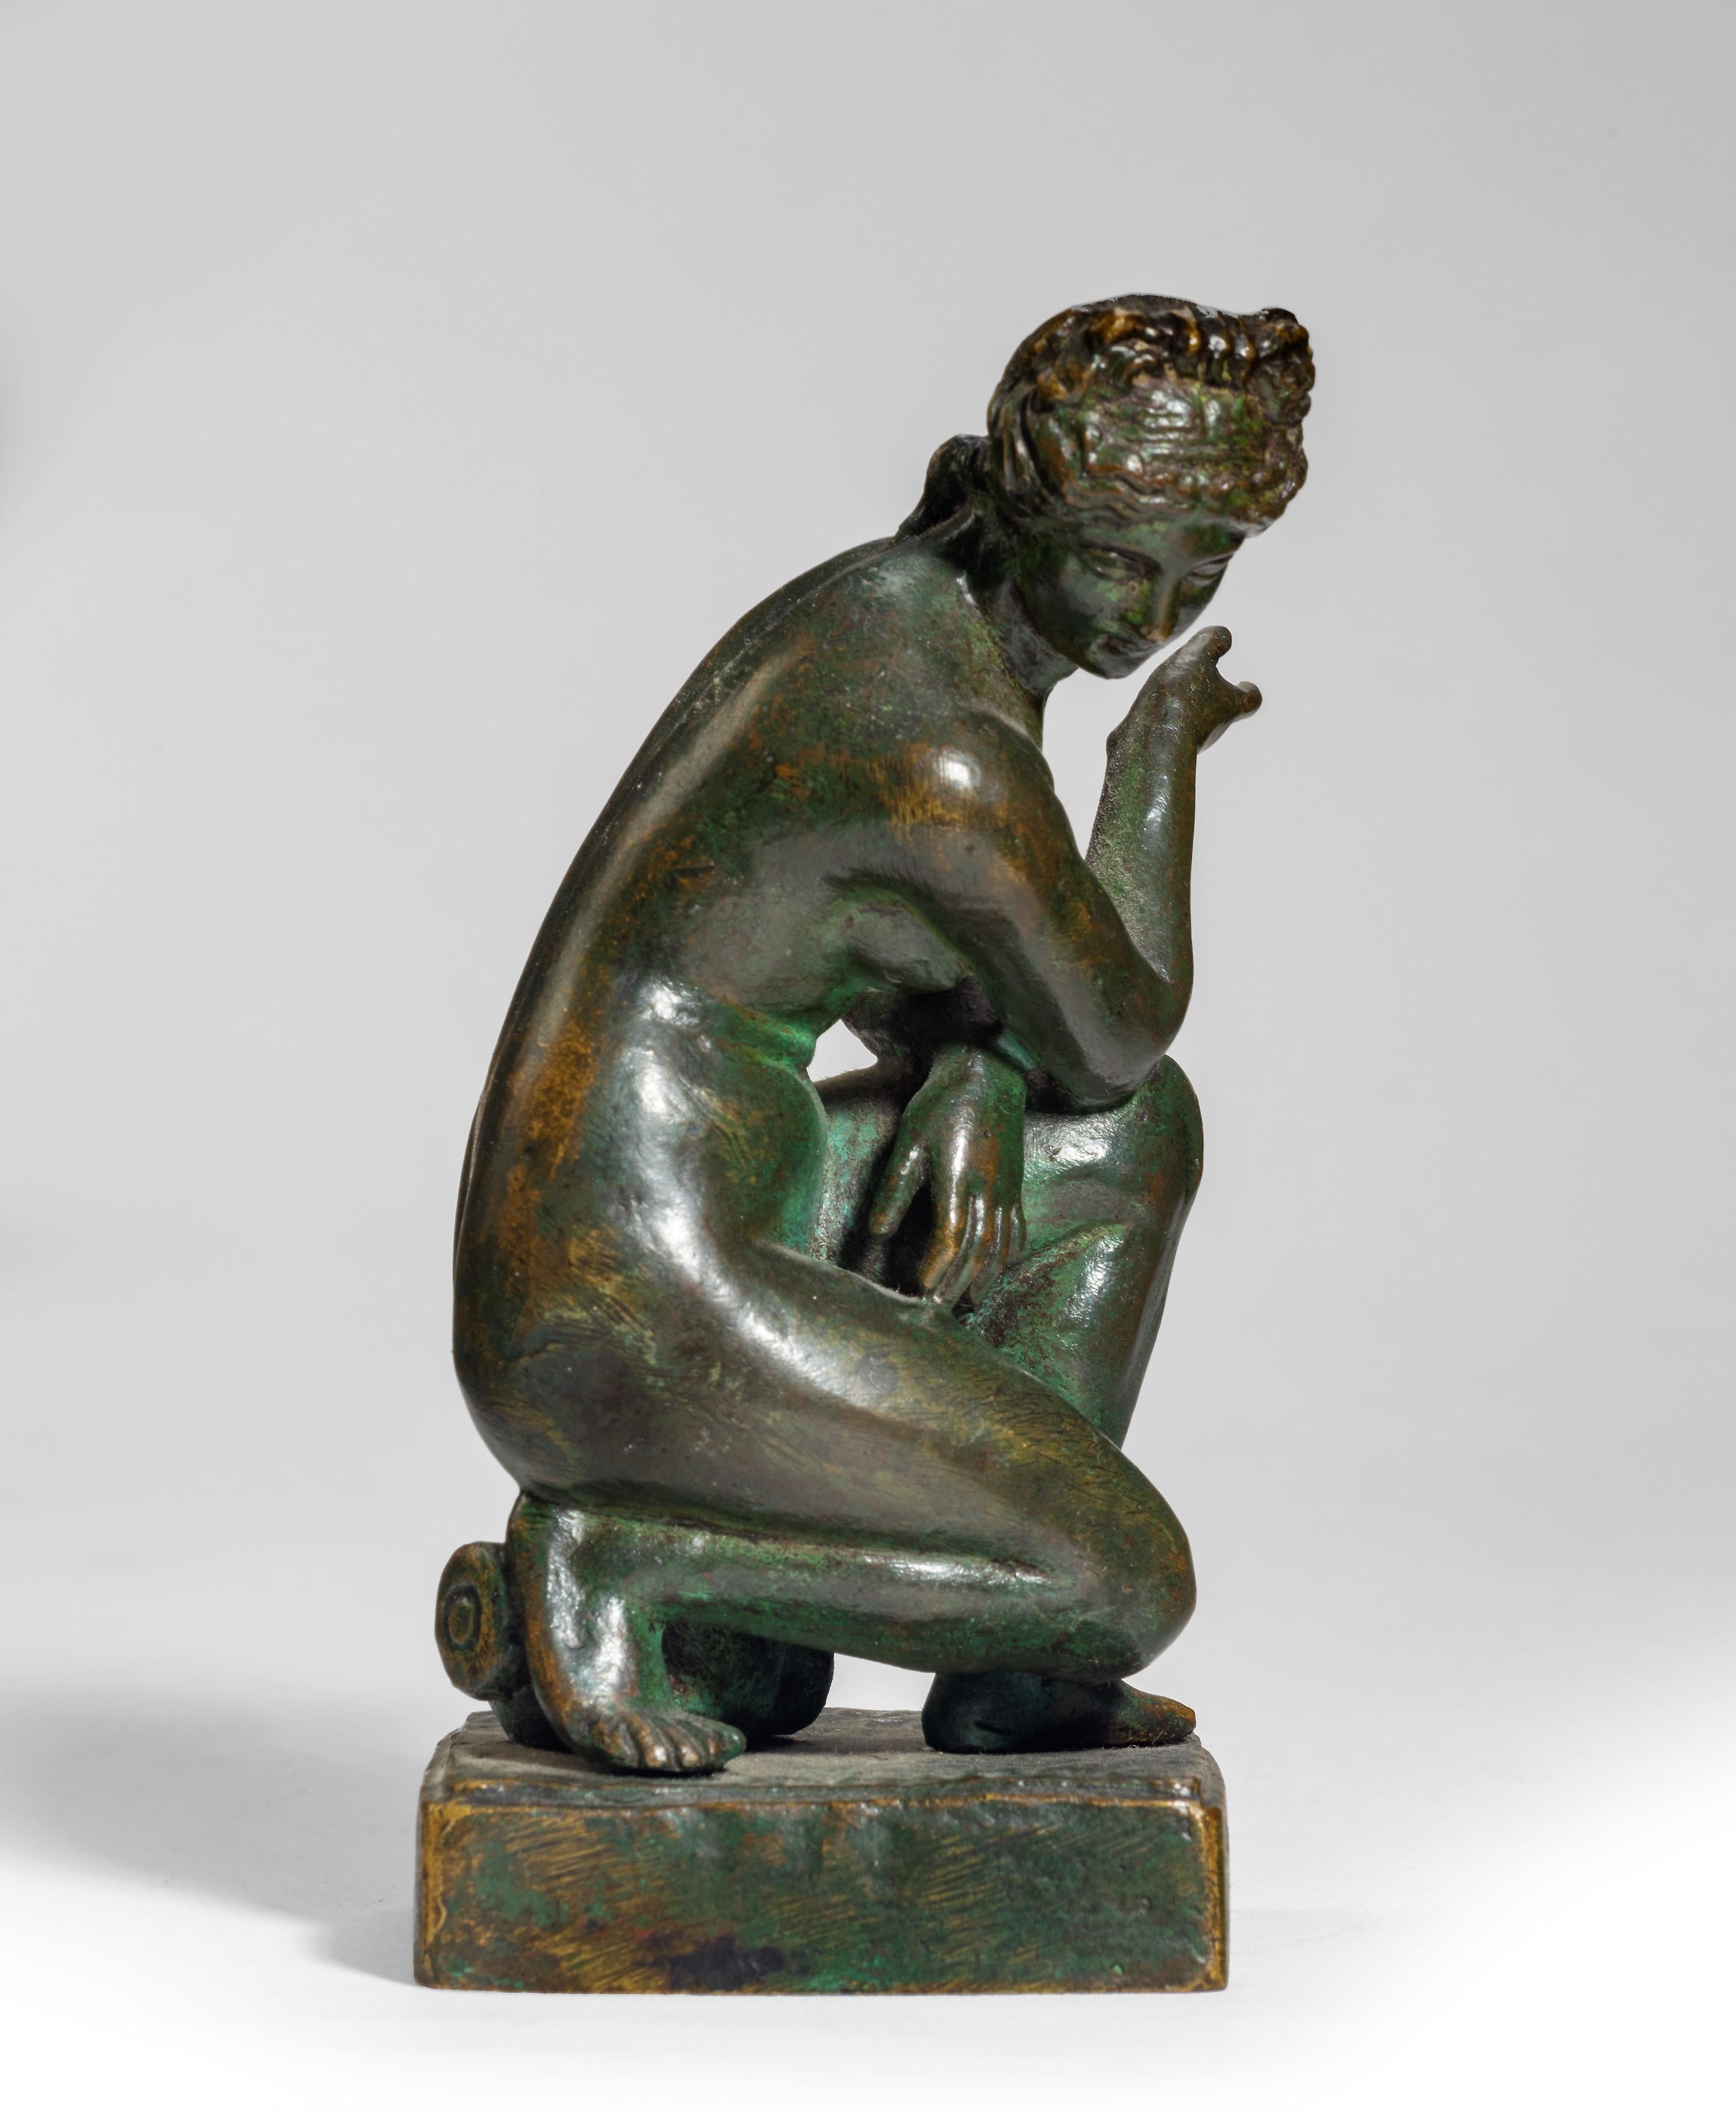 A Grand Tour bronze model of 'Crouching Venus', After the Antique - Sculpture by Unknown